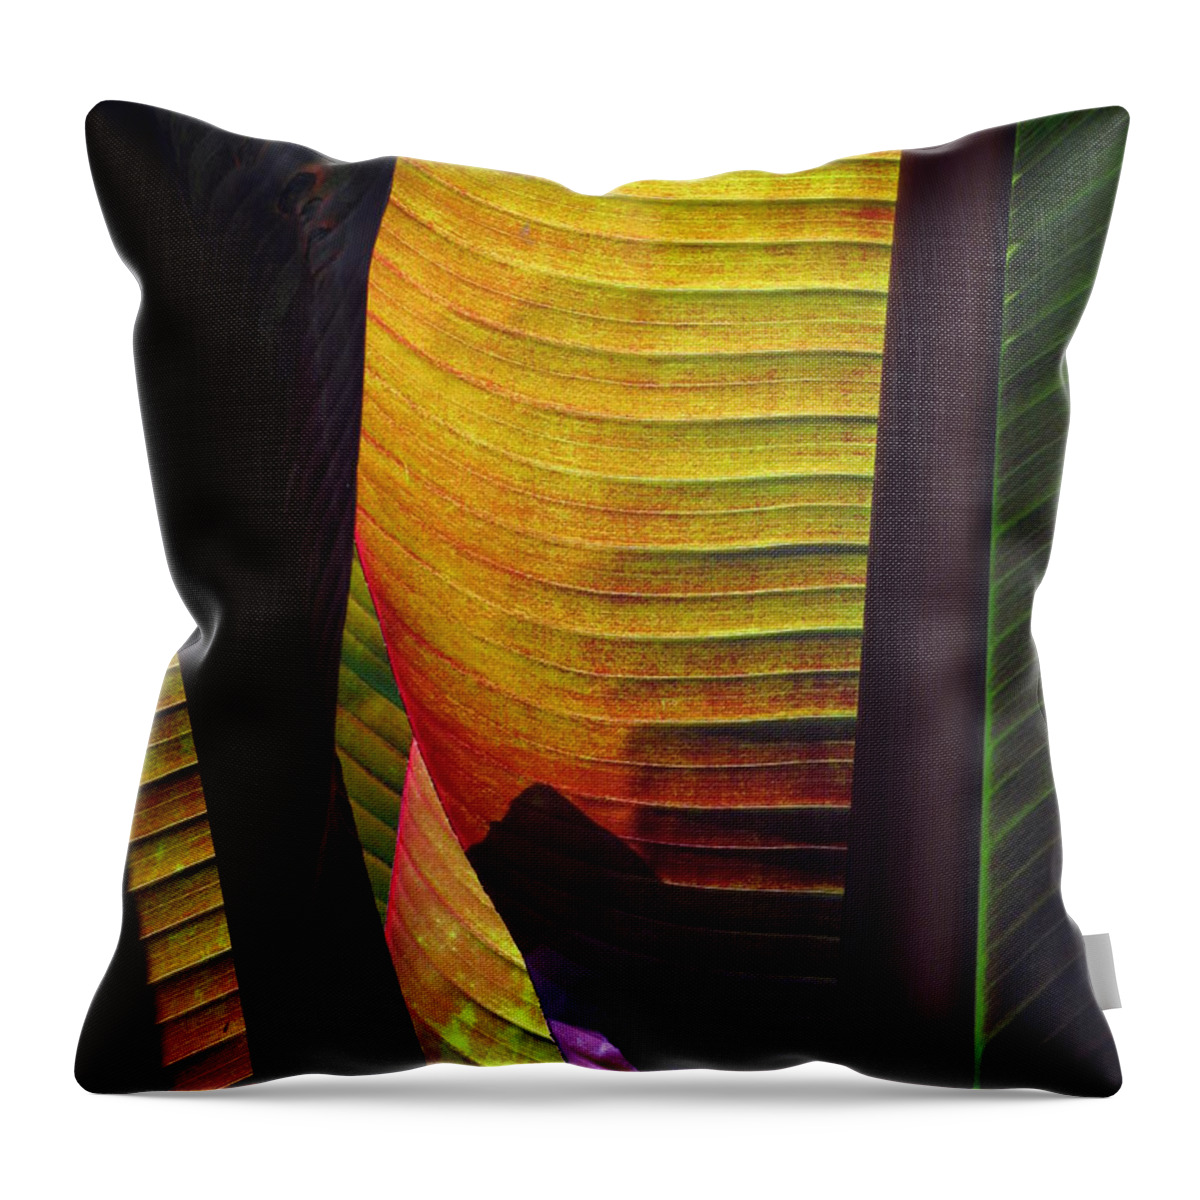 Leaf Throw Pillow featuring the photograph Shade by Deborah Crew-Johnson